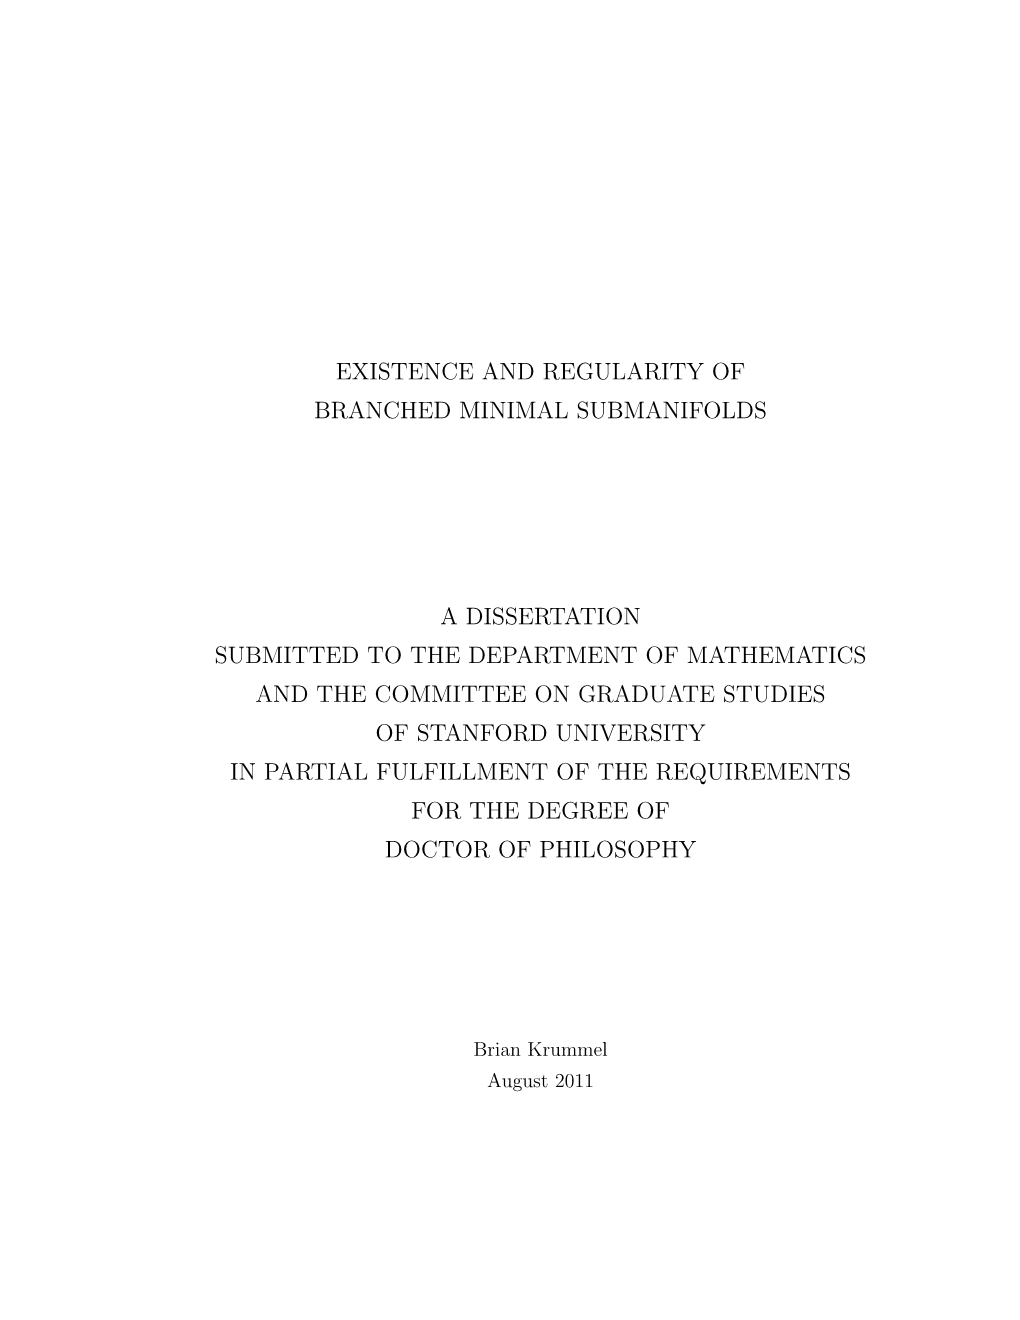 Existence and Regularity of Branched Minimal Submanifolds